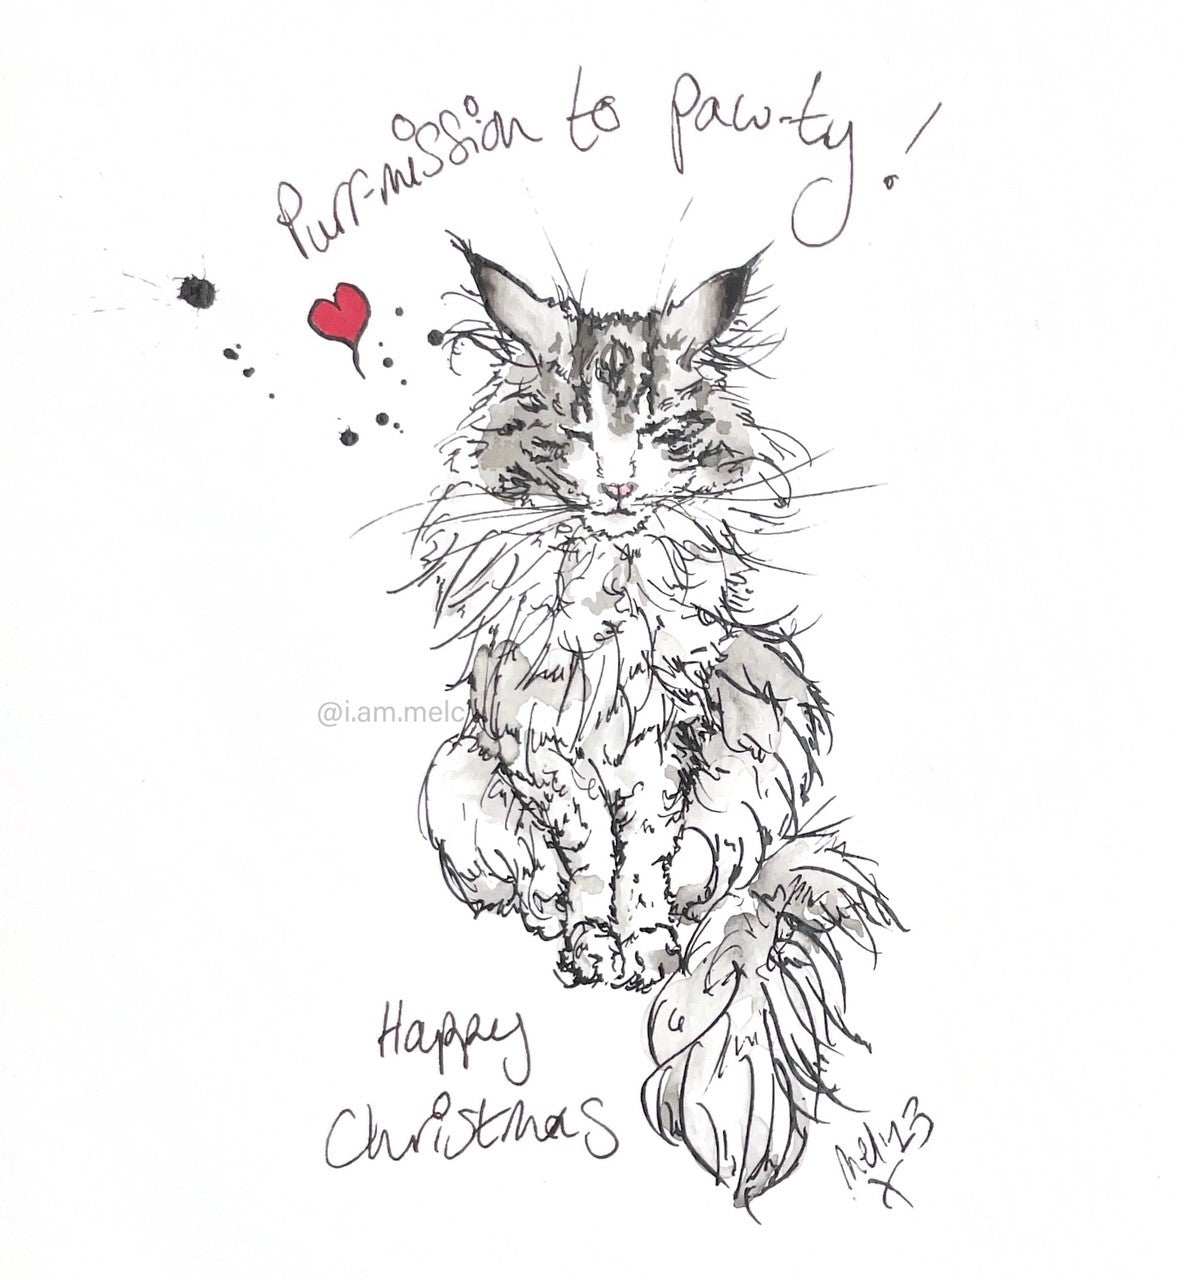 "Purr-mission to Paw-ty" Pen & Ink Cat Drawing by Melanie Cairns.